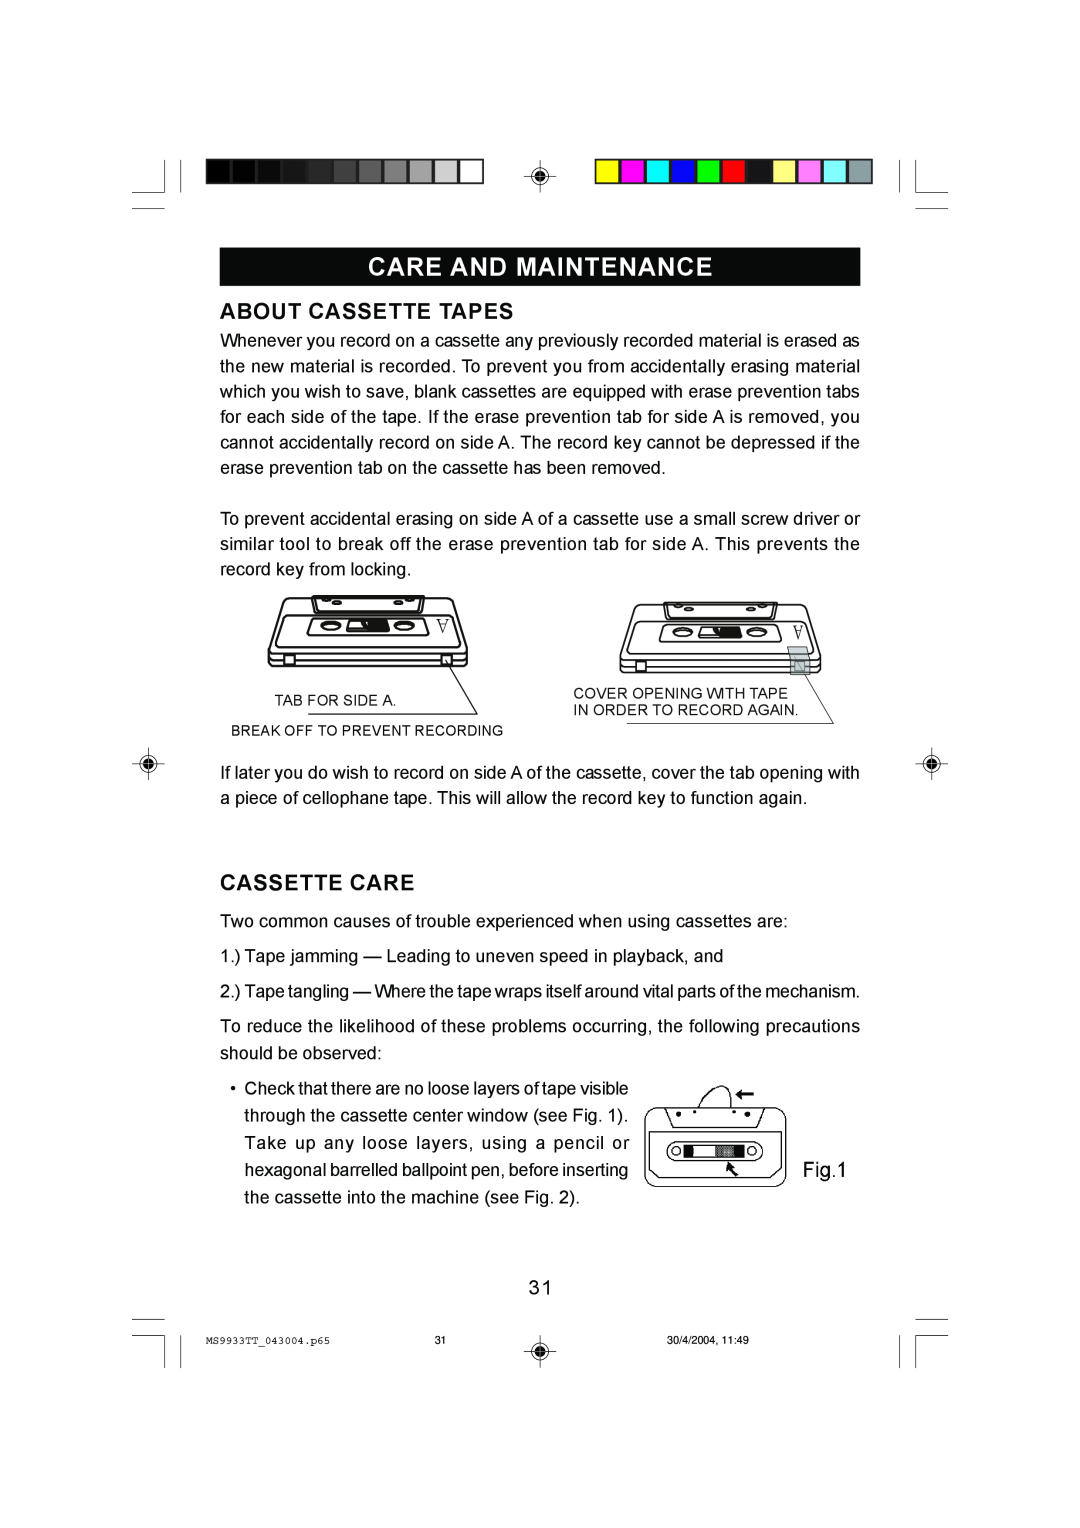 Emerson MS9933TT owner manual Care And Maintenance, About Cassette Tapes, Cassette Care 